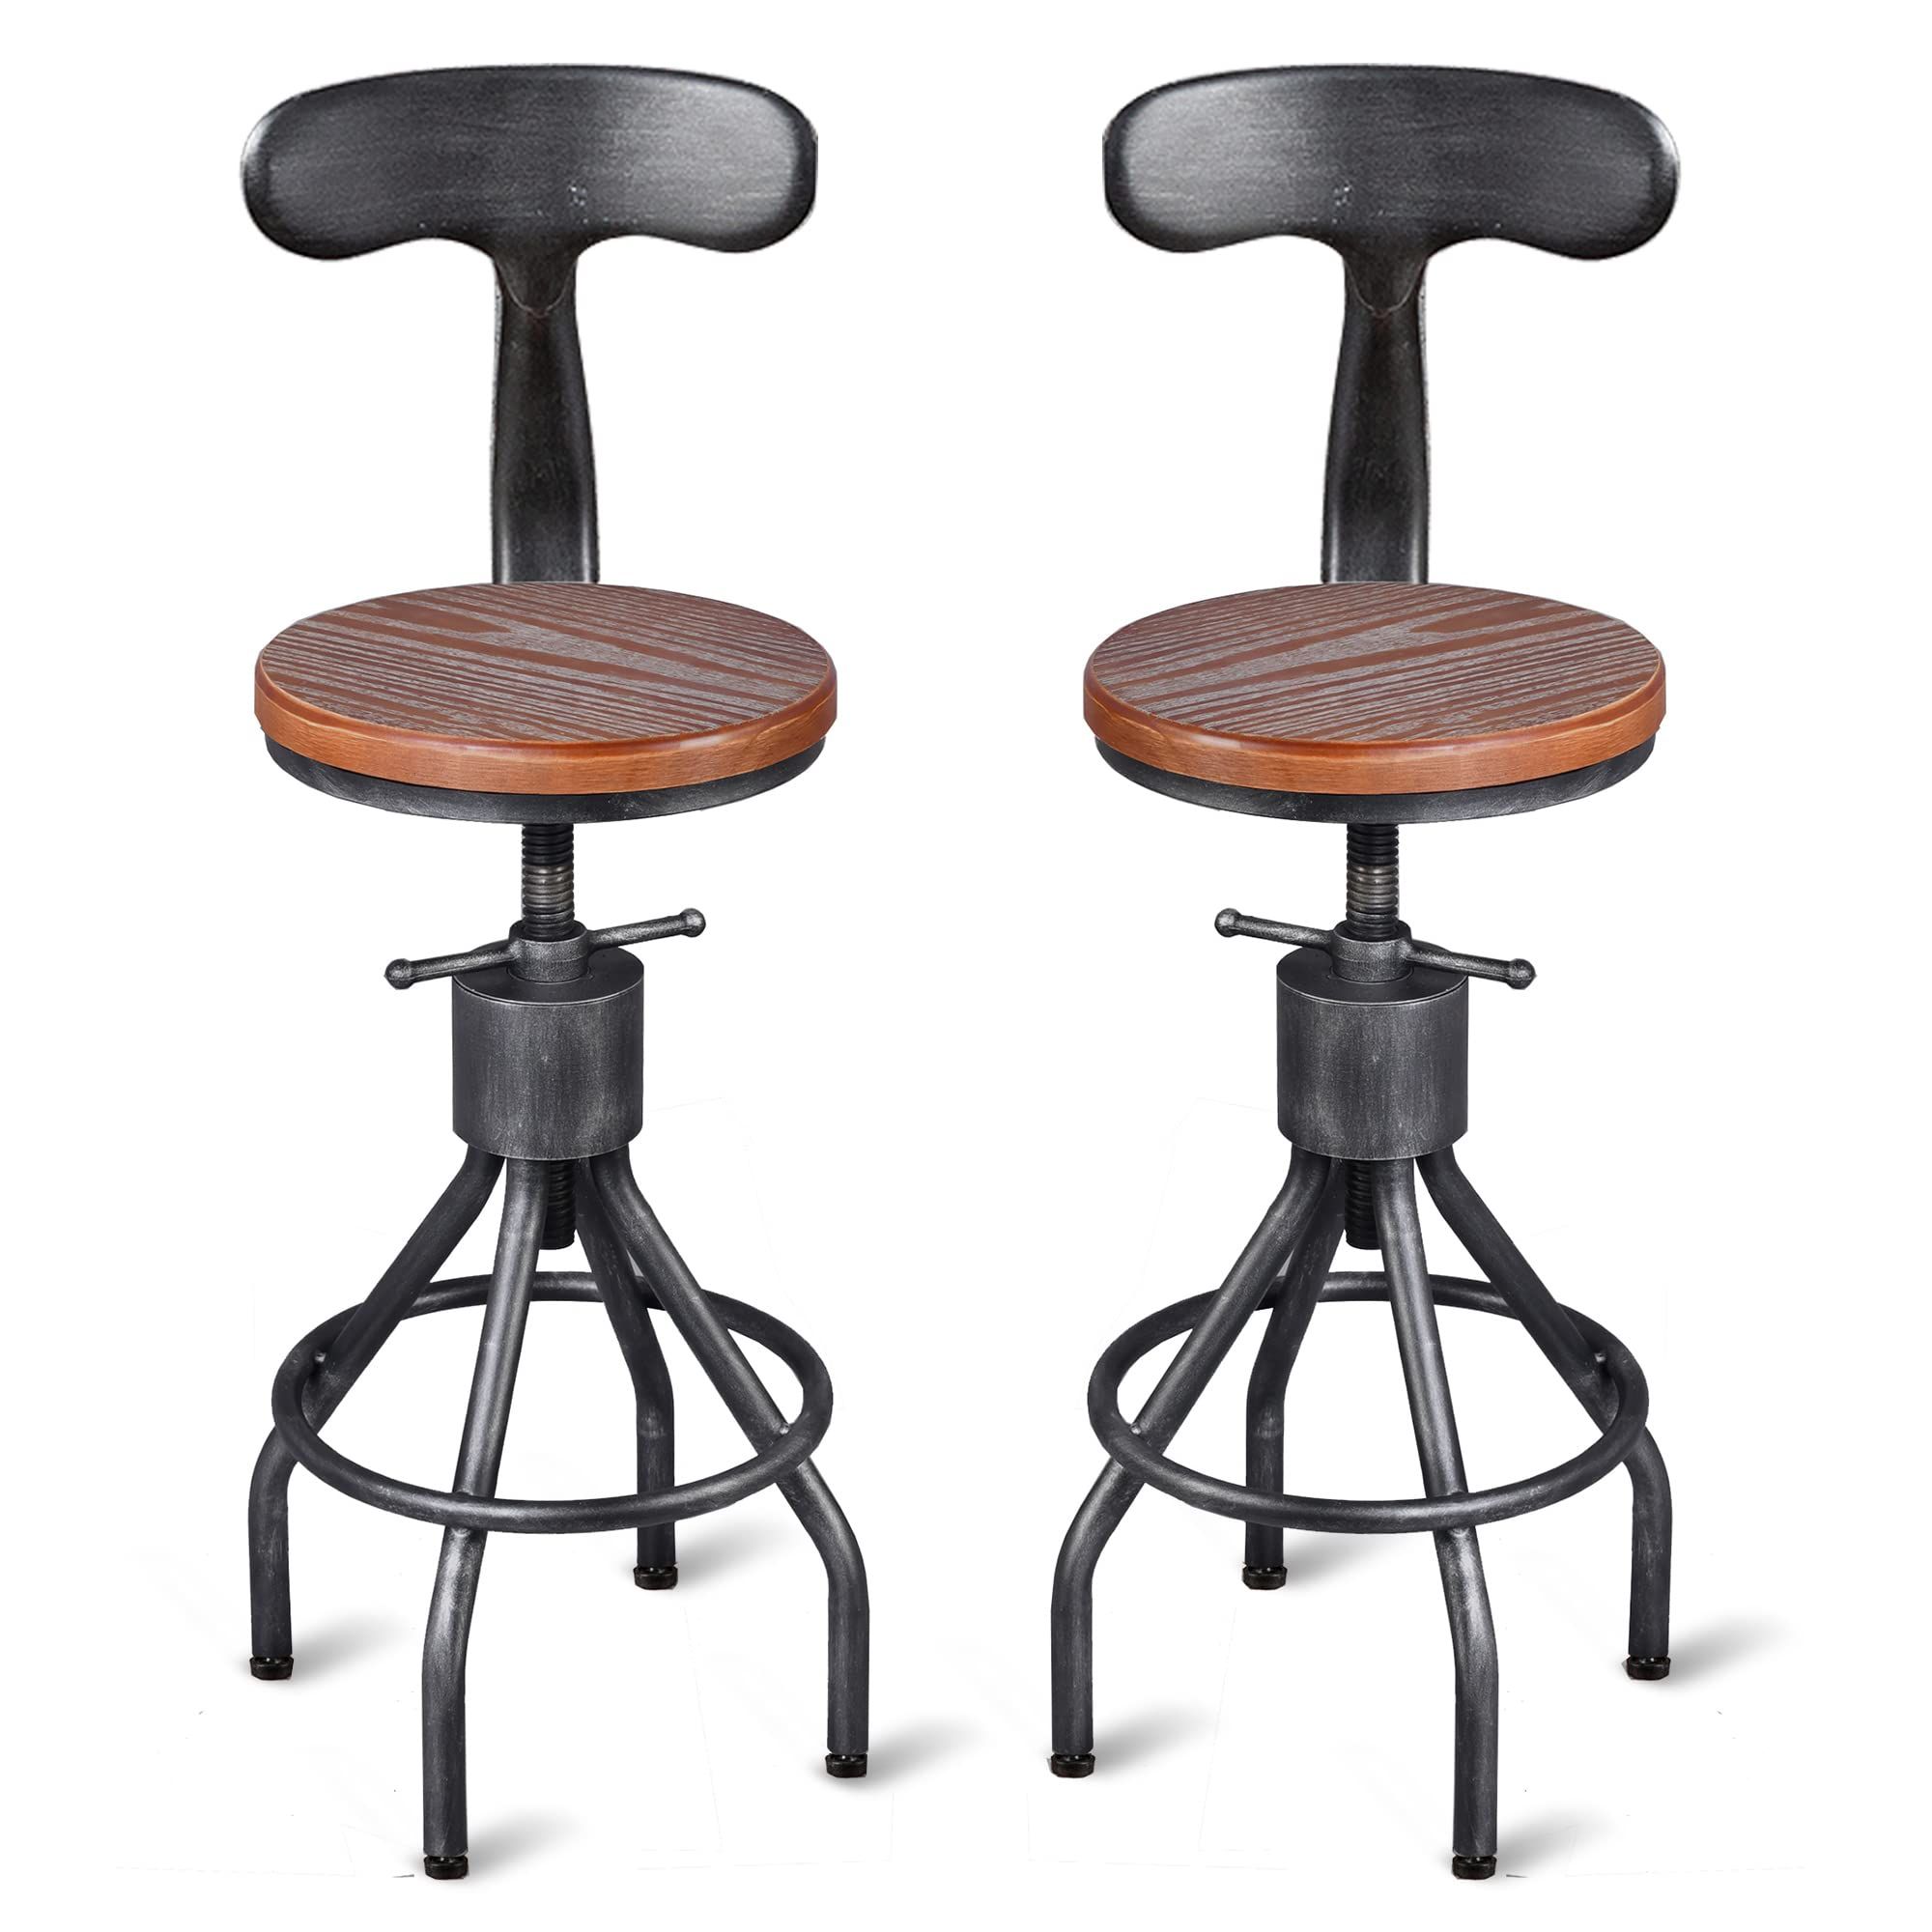 Enjoy buying the bar stools through the best online stores. post thumbnail image